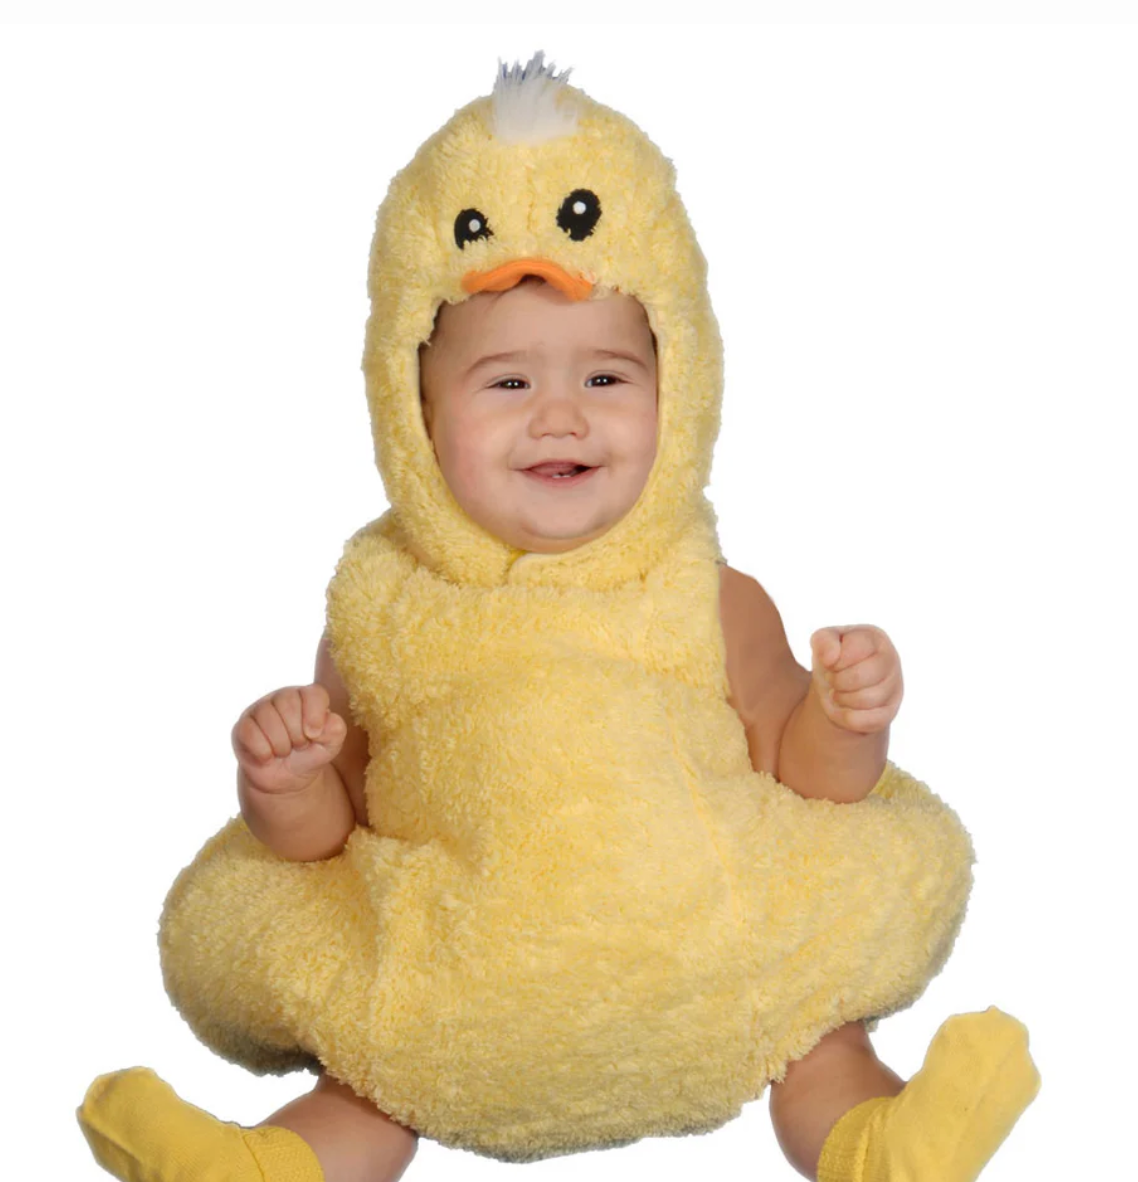 Quack Up with the Cute Little Baby Duck Costume